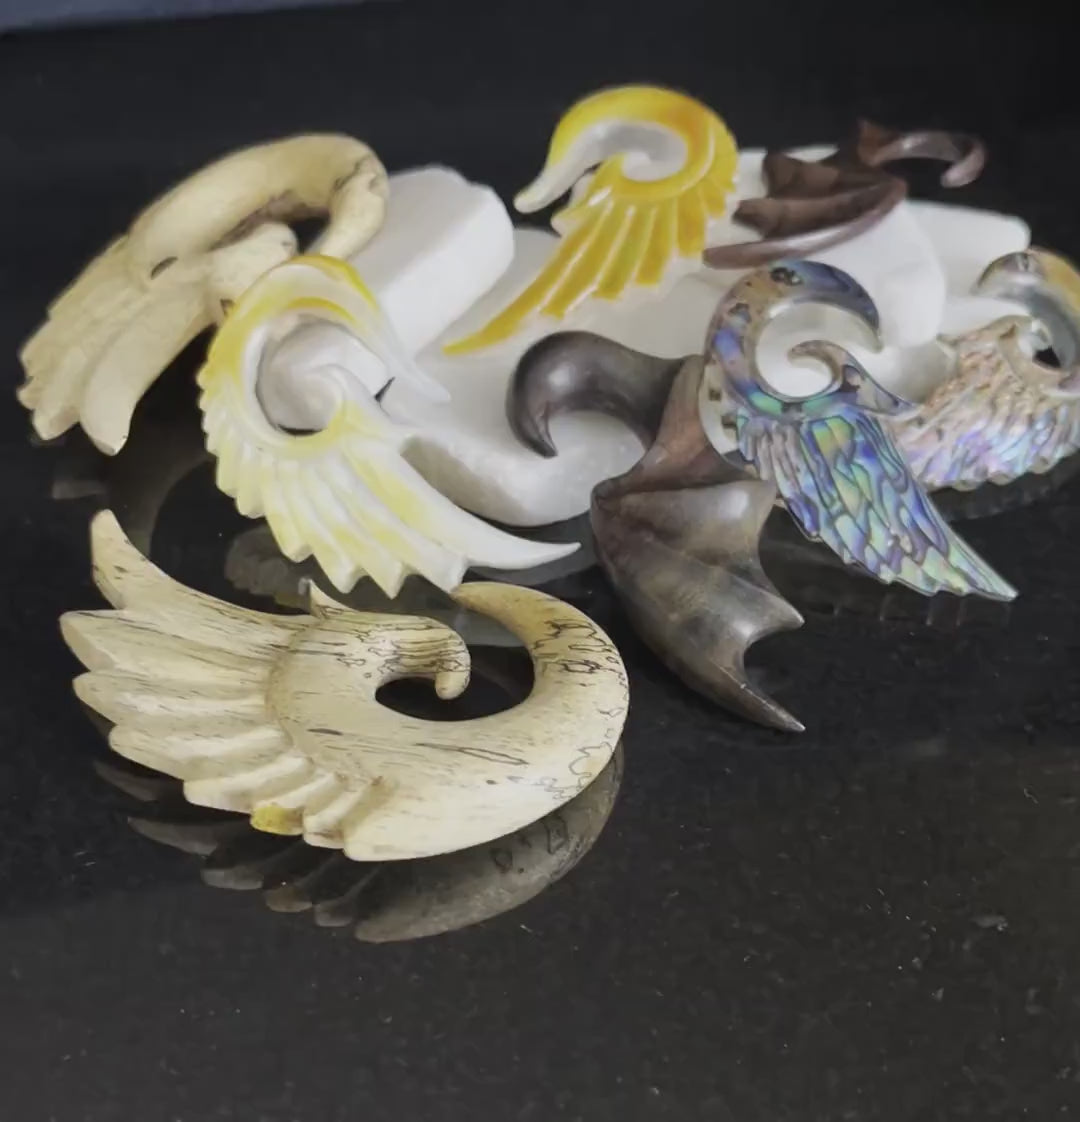 PAIR of Stunning Organic Abalone Angel Wing Tapers - Expander Gauges 8g (3.2mm) through 2g (6mm) available!